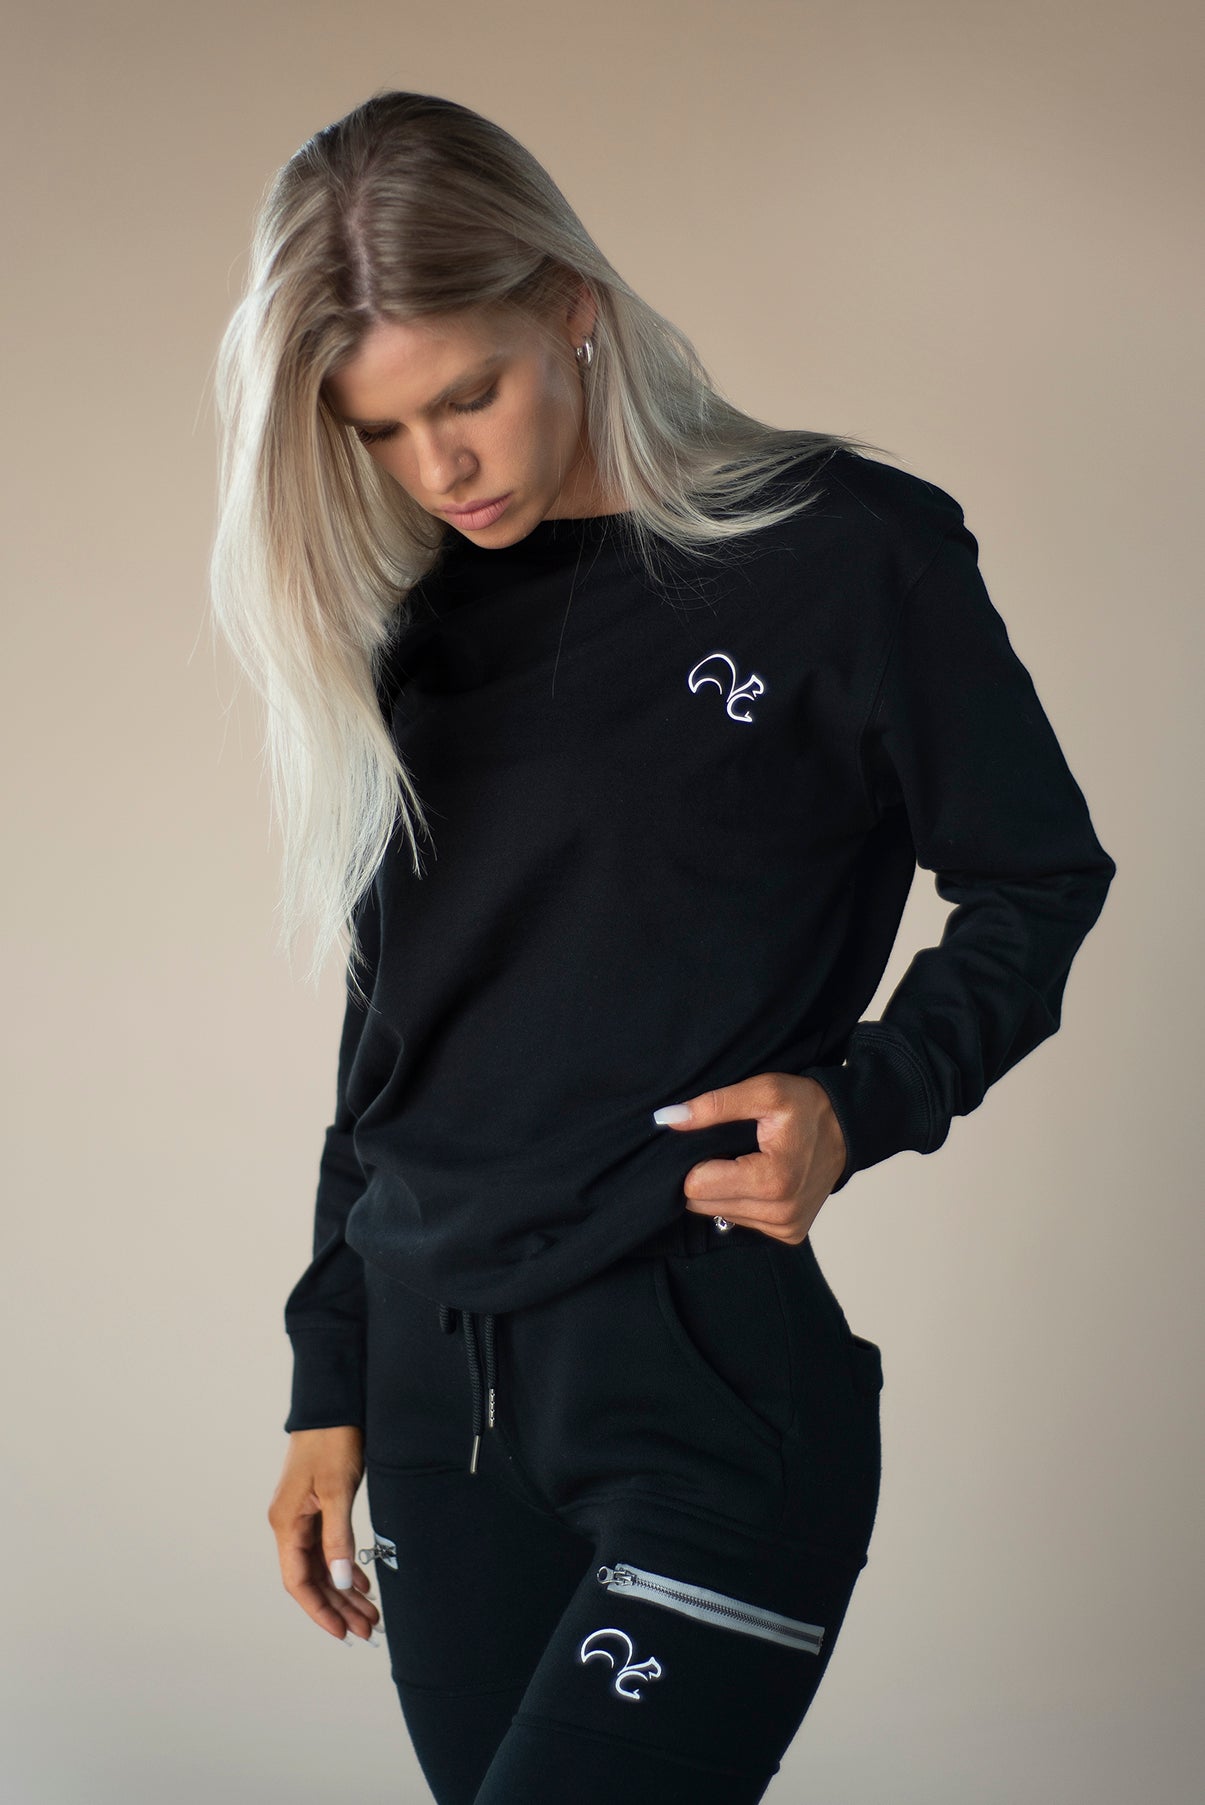 Fit-Squirrel Apparel | Gym and Fitness Clothing for Men and Women